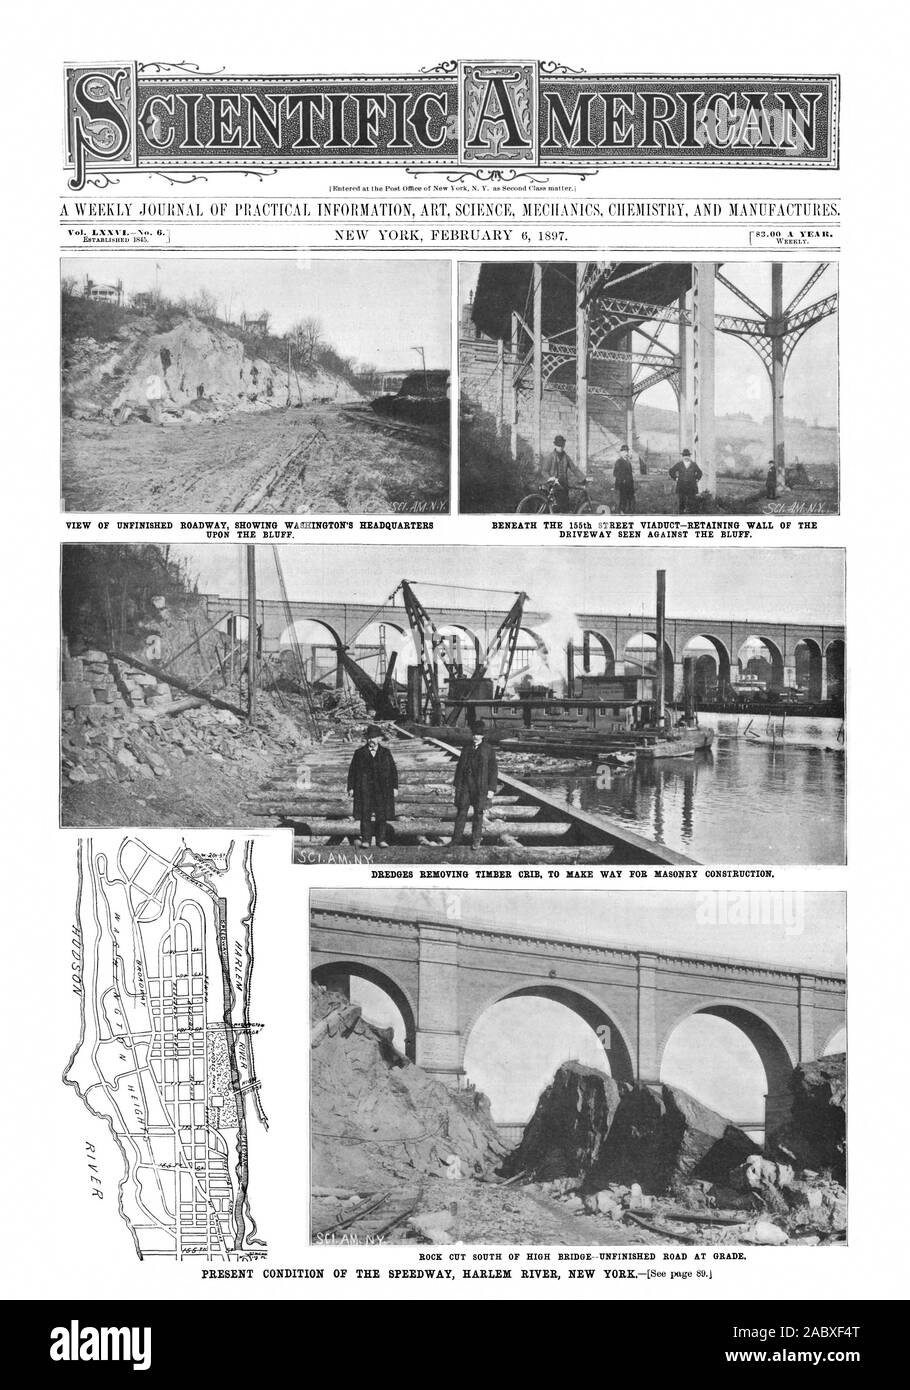 VIEW OF UNFINISHED ROADWAY SHOWING WASHINGTON'S HEADQUARTERS BENEATH THE 155th STREET VIADUCT—RETAINING WALL OF THE DREDGES REMOVING TIMBER CRIB TO MAKE WAY FOR MASONRY CONSTRUCTION., scientific american, 1897-02-06 Stock Photo